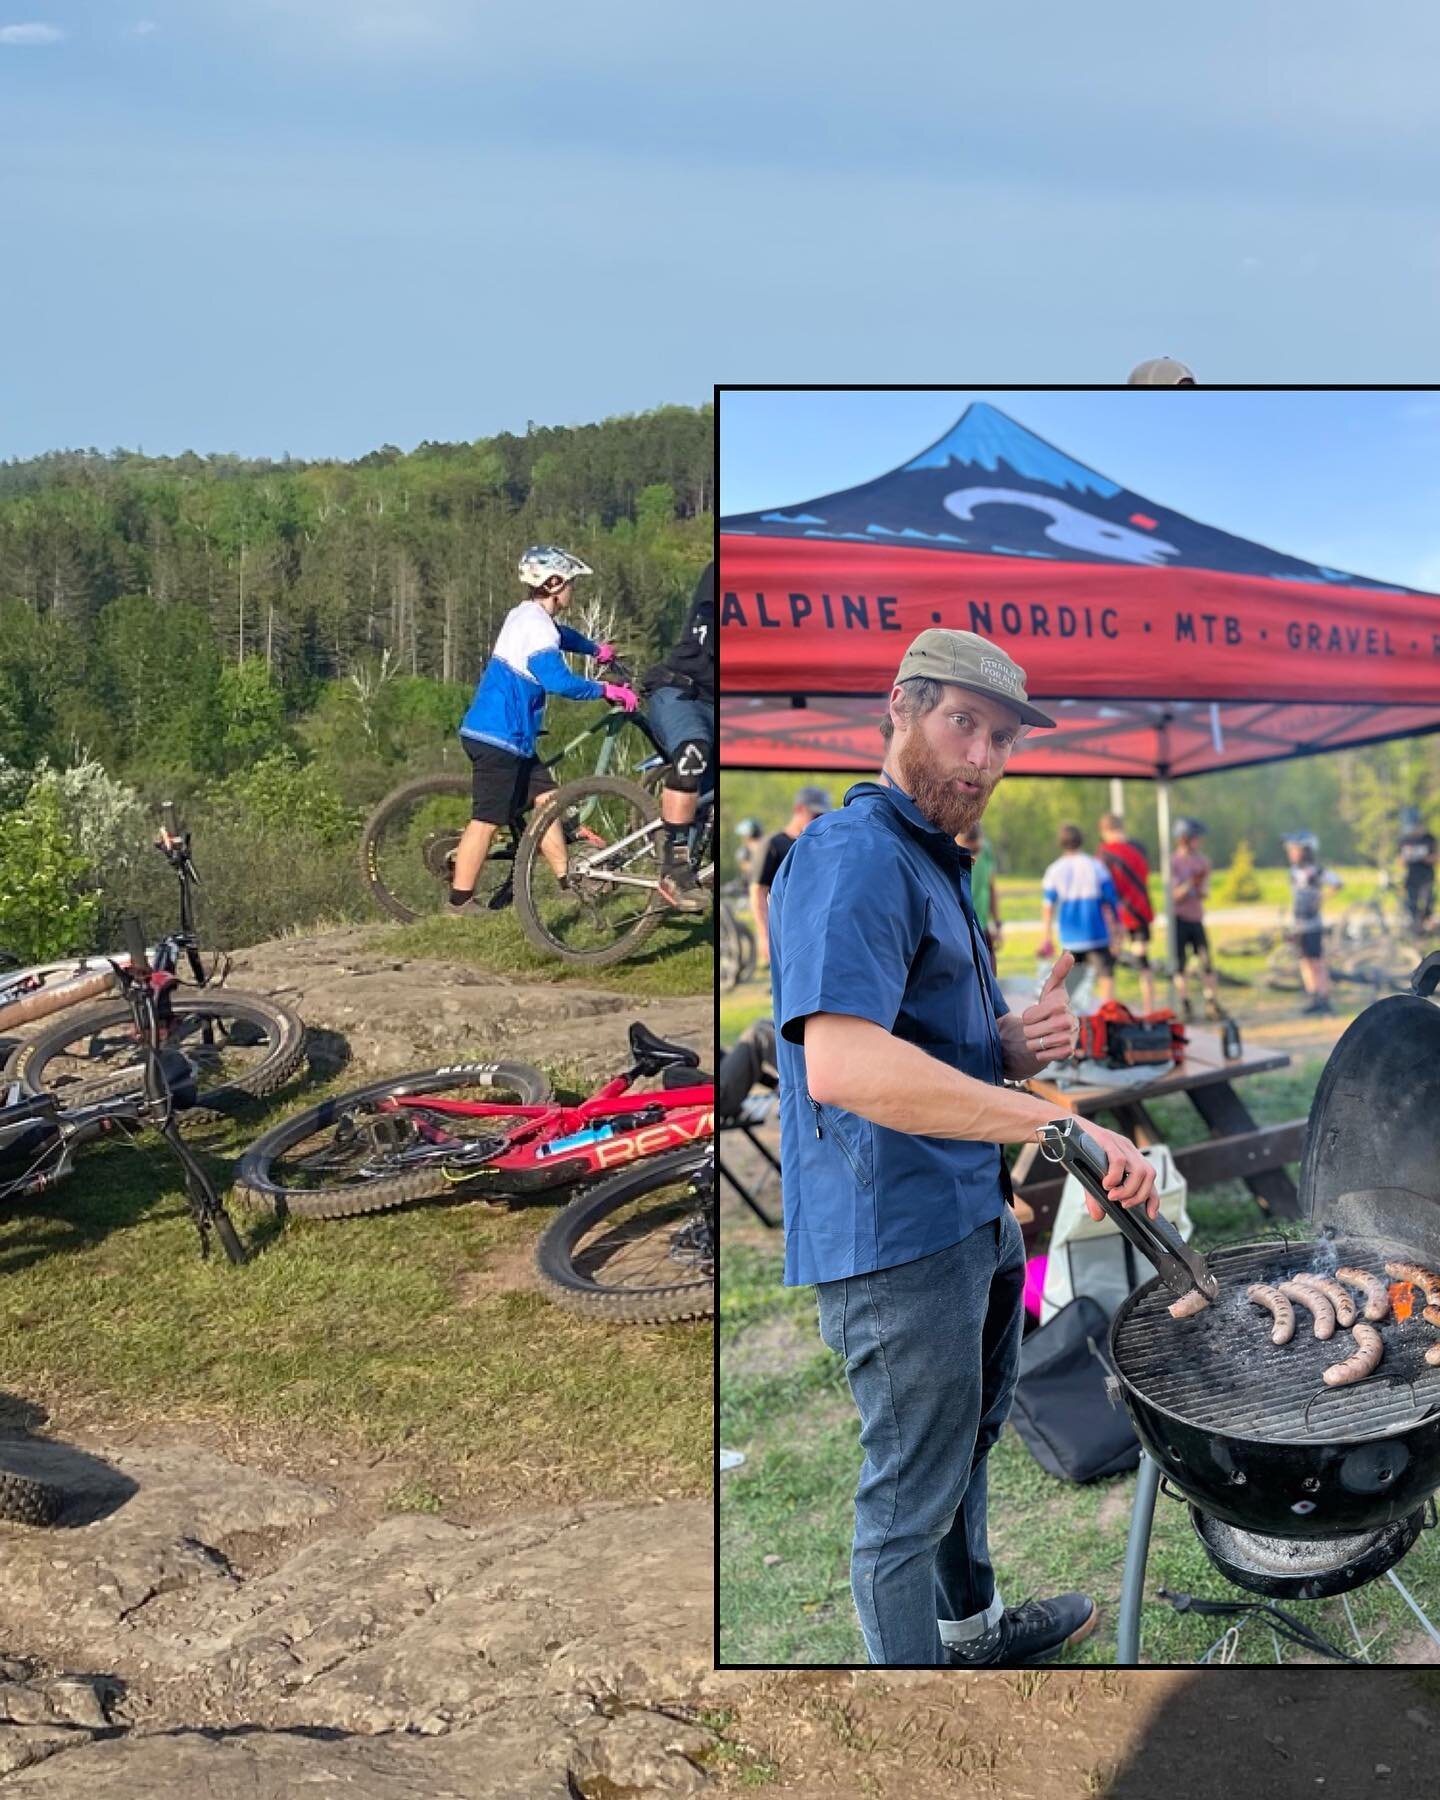 Duluth Enduro Series Recap!
We kicked this season off in May at Hartley, which is likely the first enduro there! Then we were off to @spiritmtduluth for the second stop where we set an attendance record of 120 folks racing! After that it was Brewer t